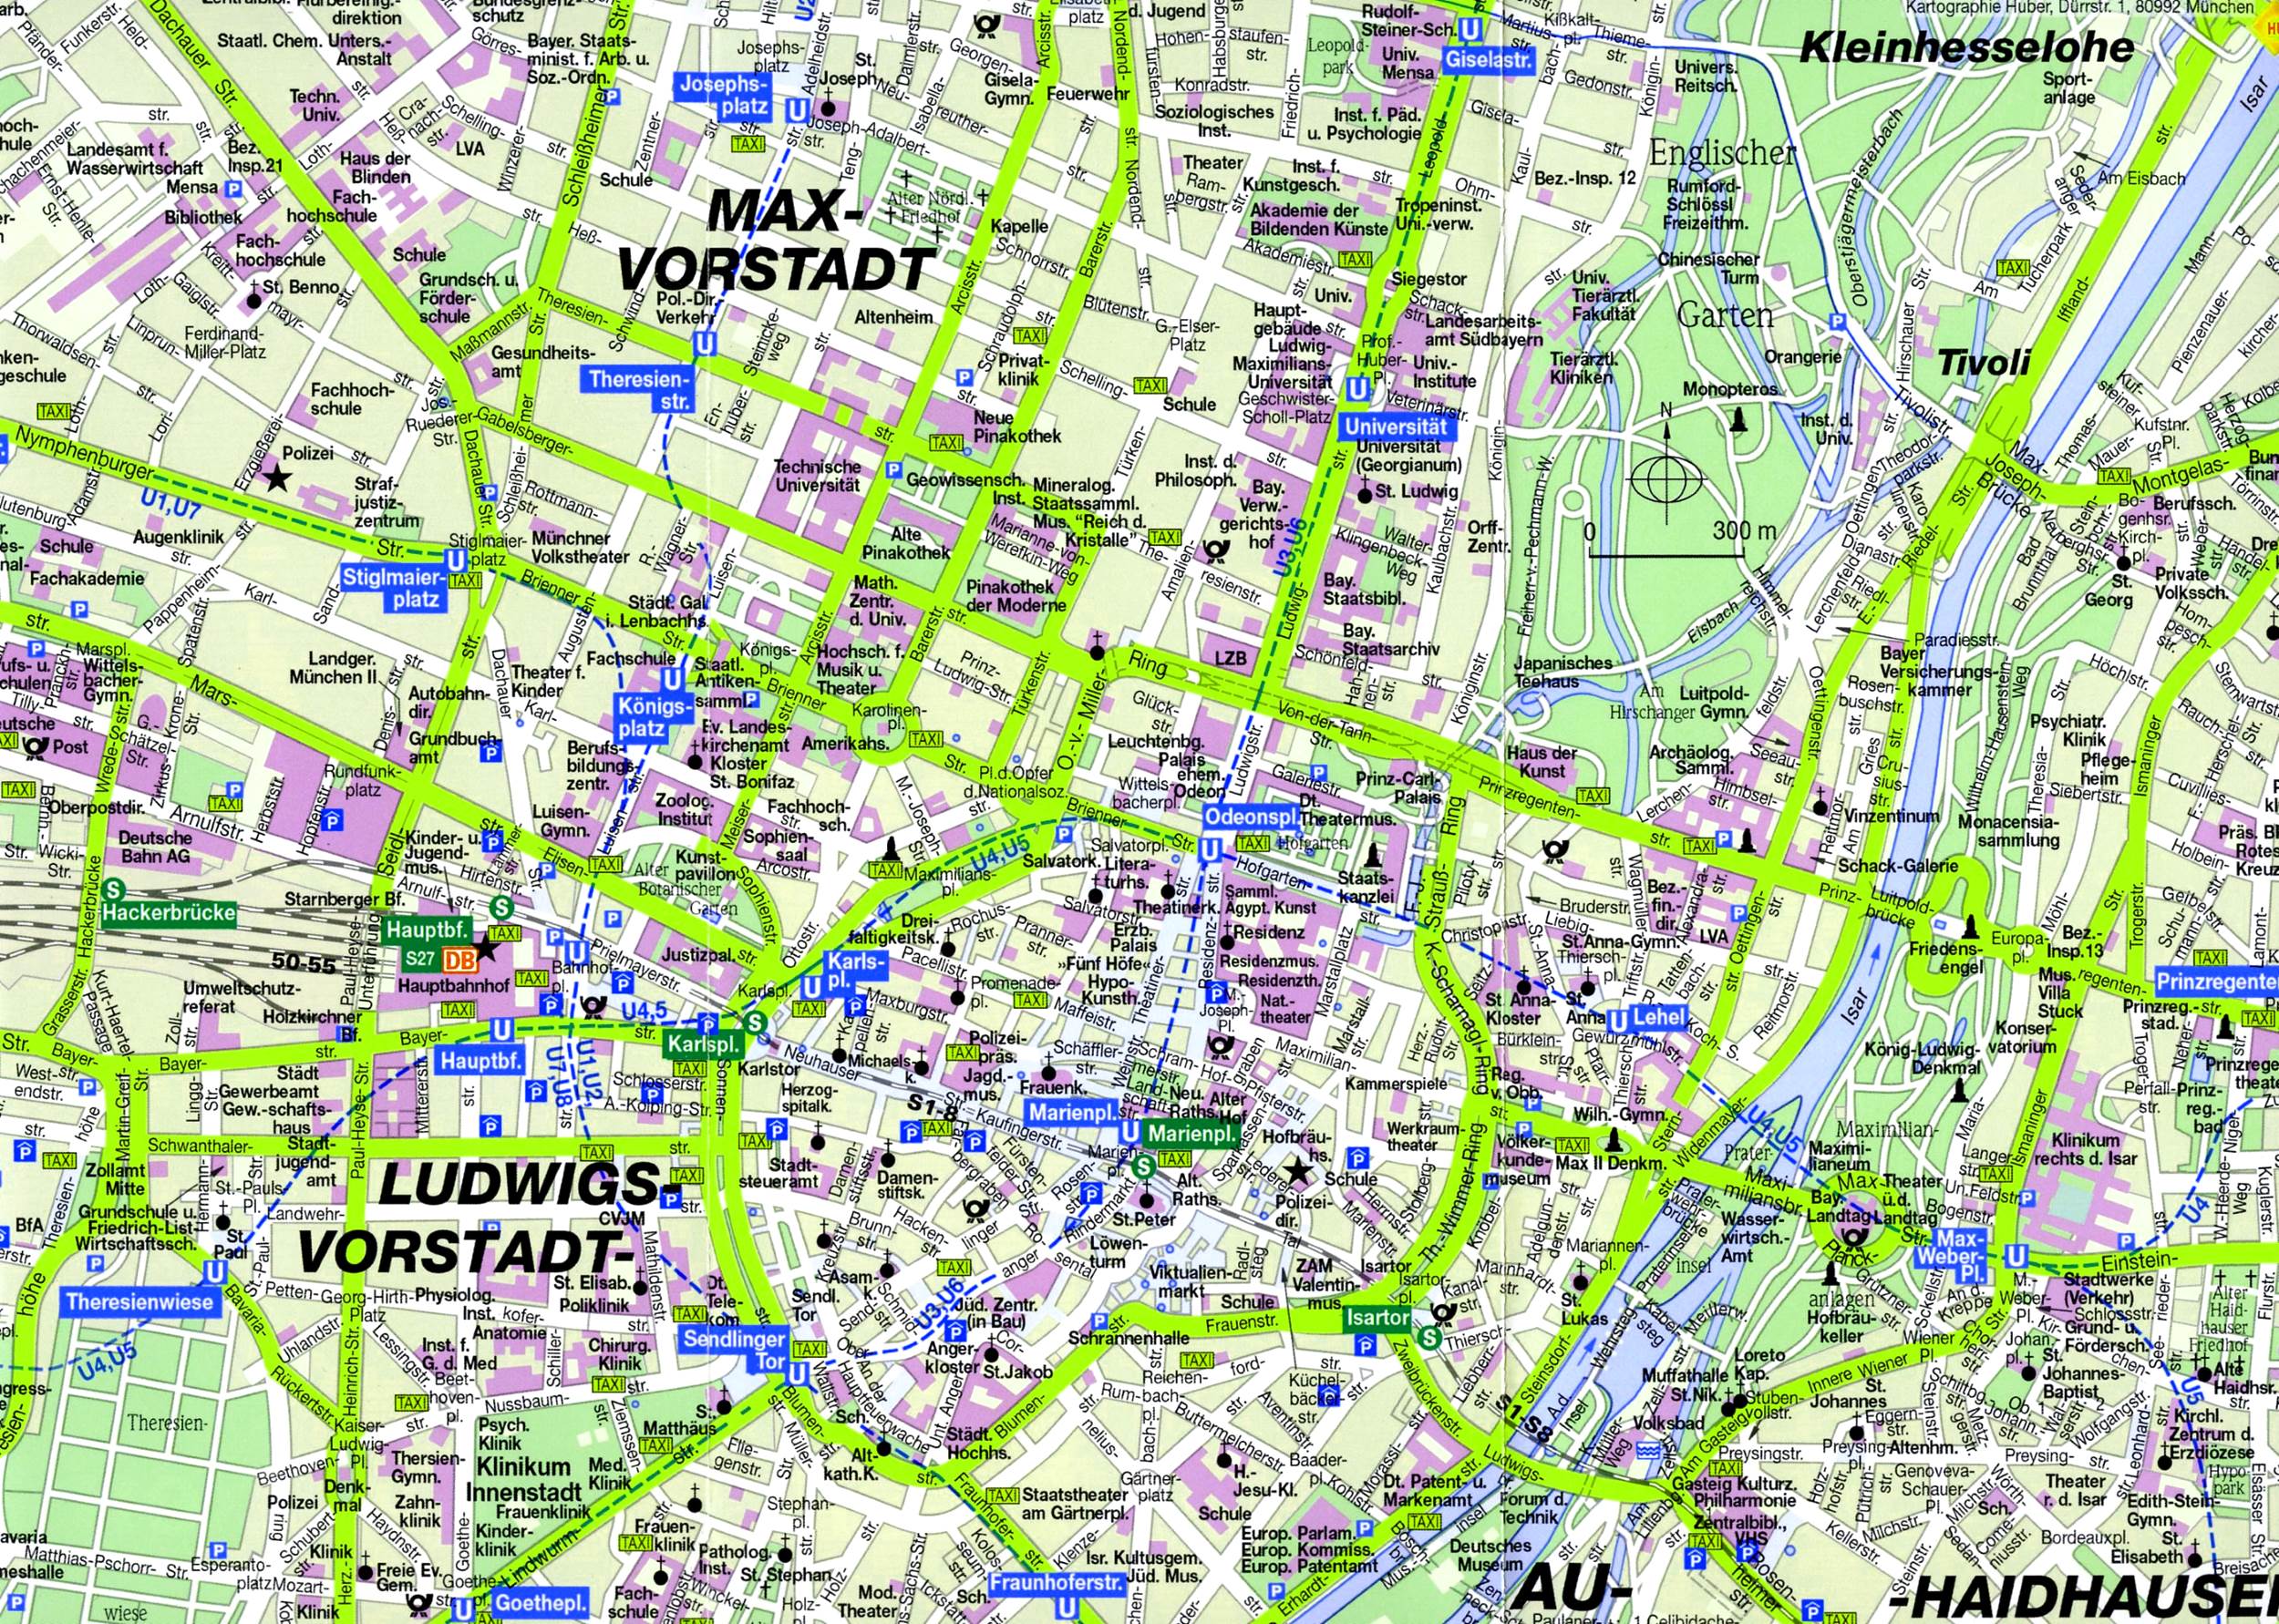 Munich with sights on the map